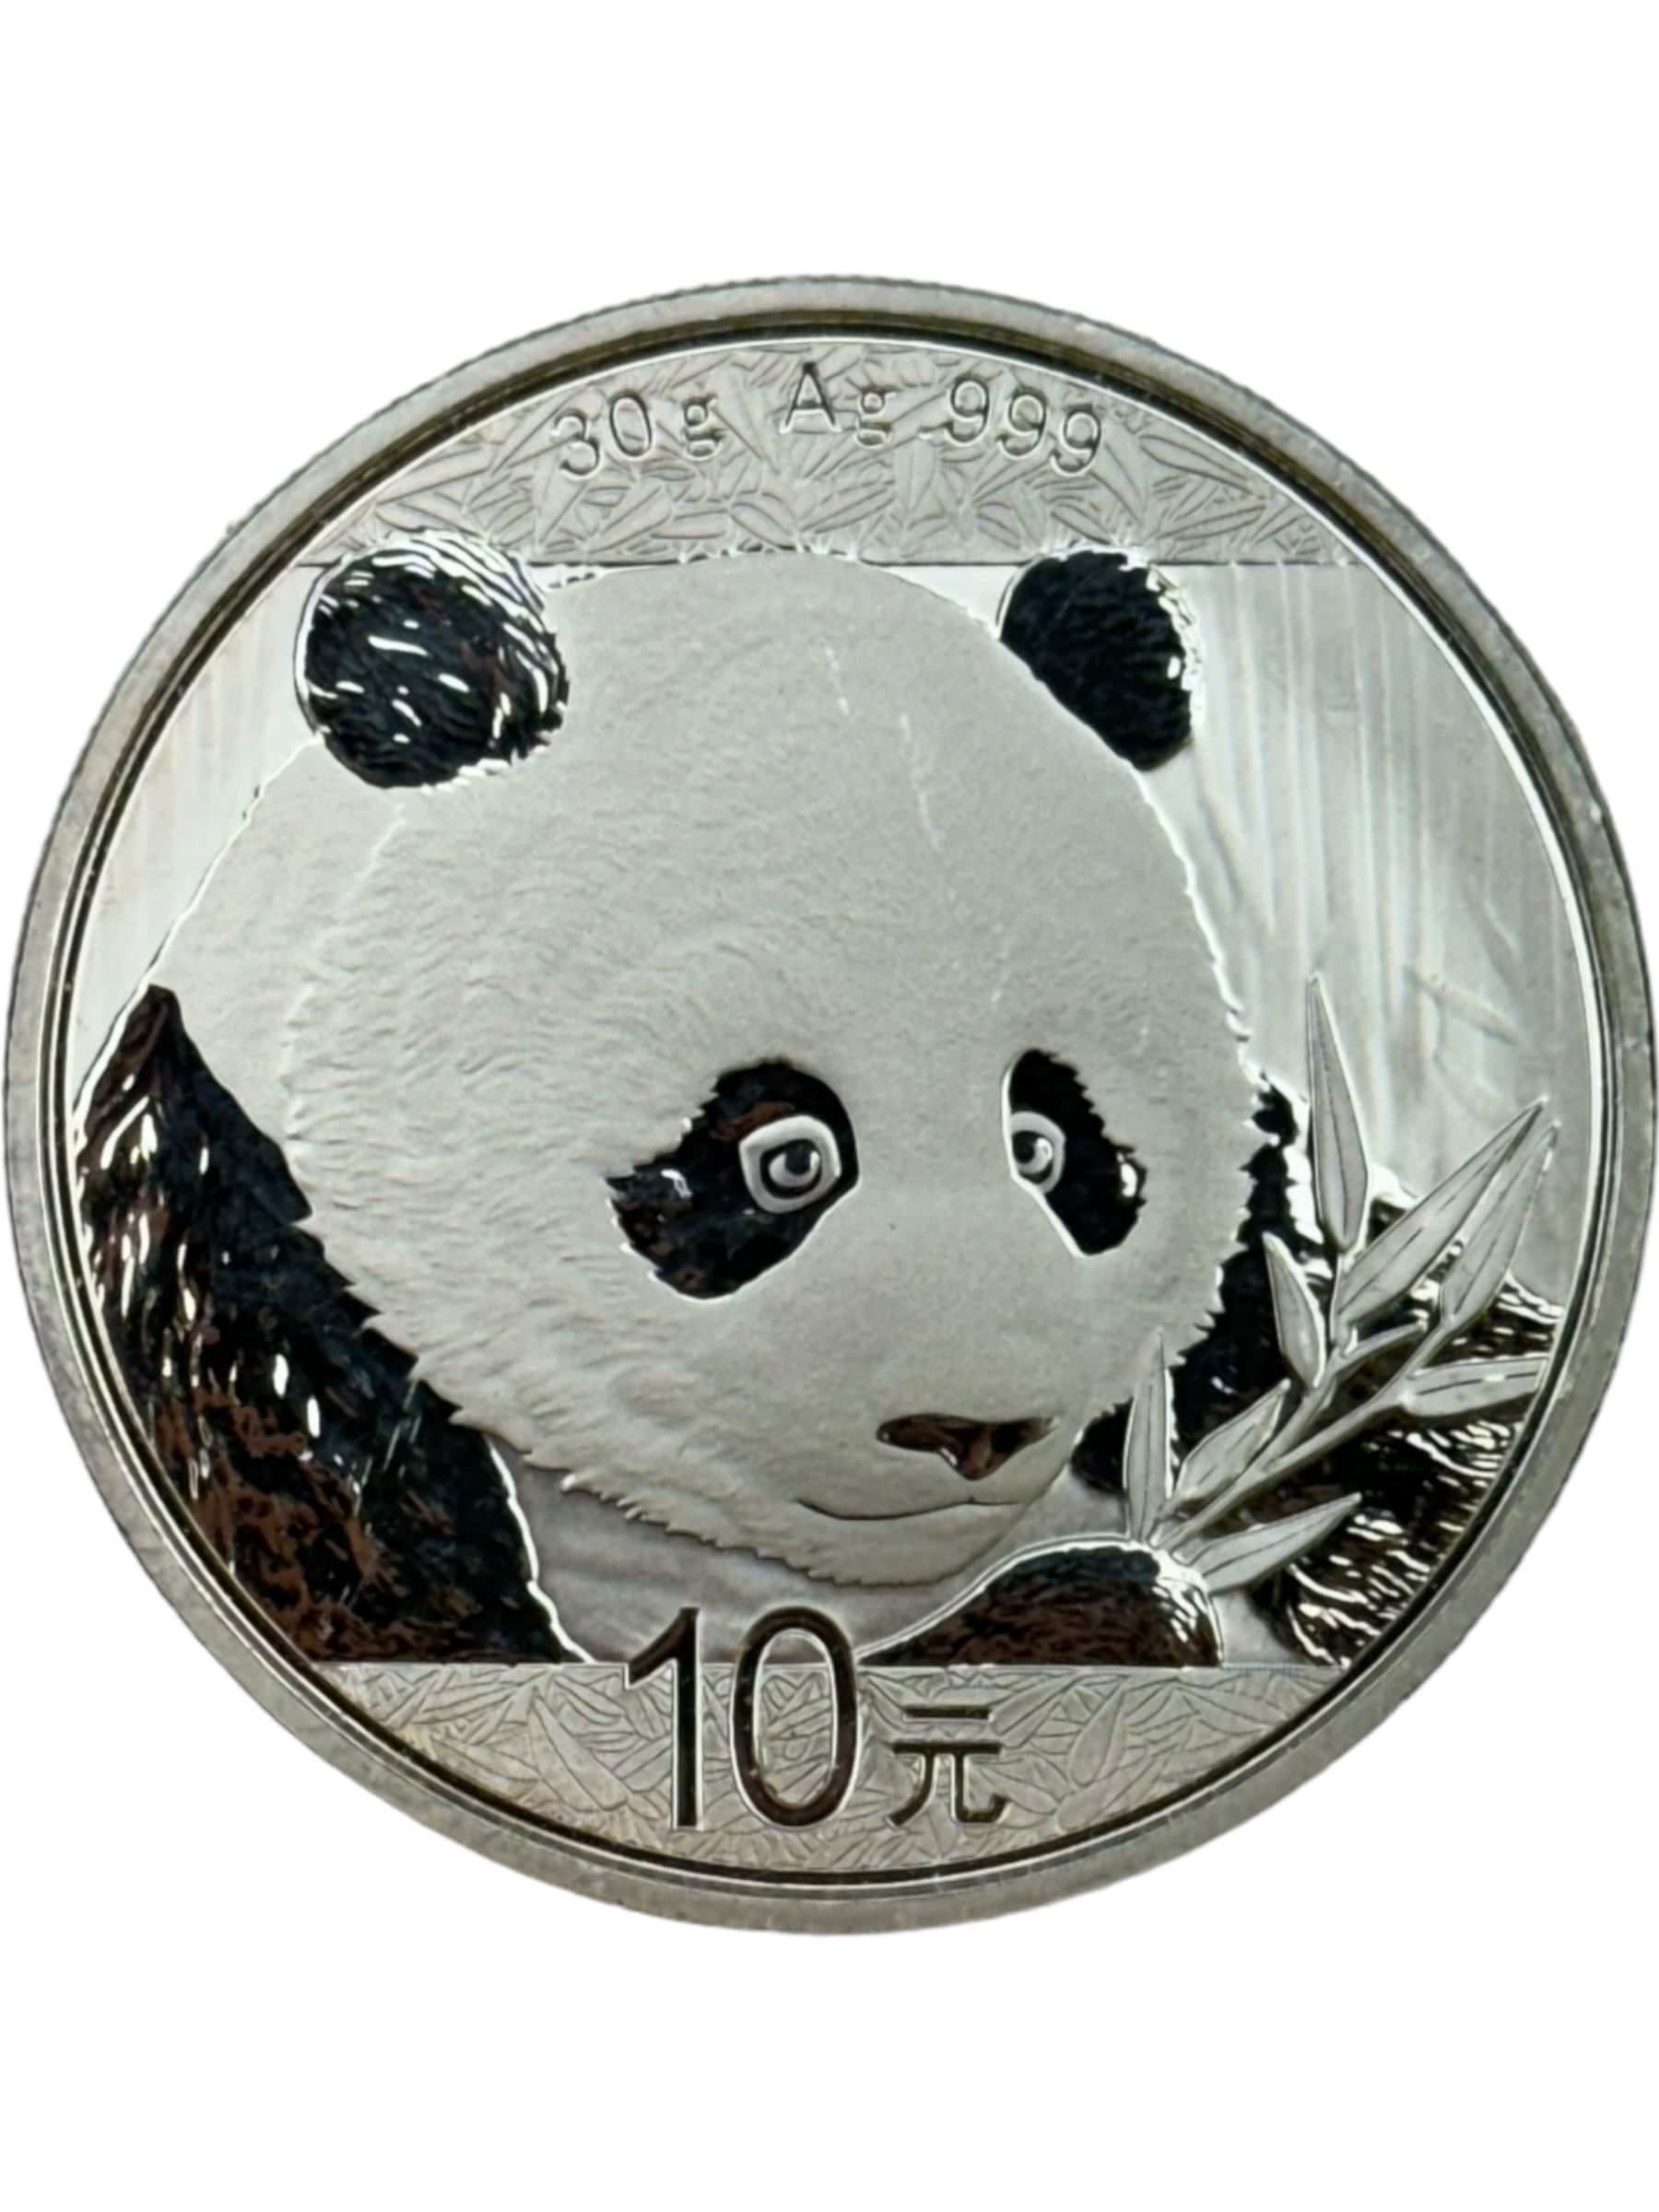 Five China 30g fine silver Panda coins - Image 2 of 7